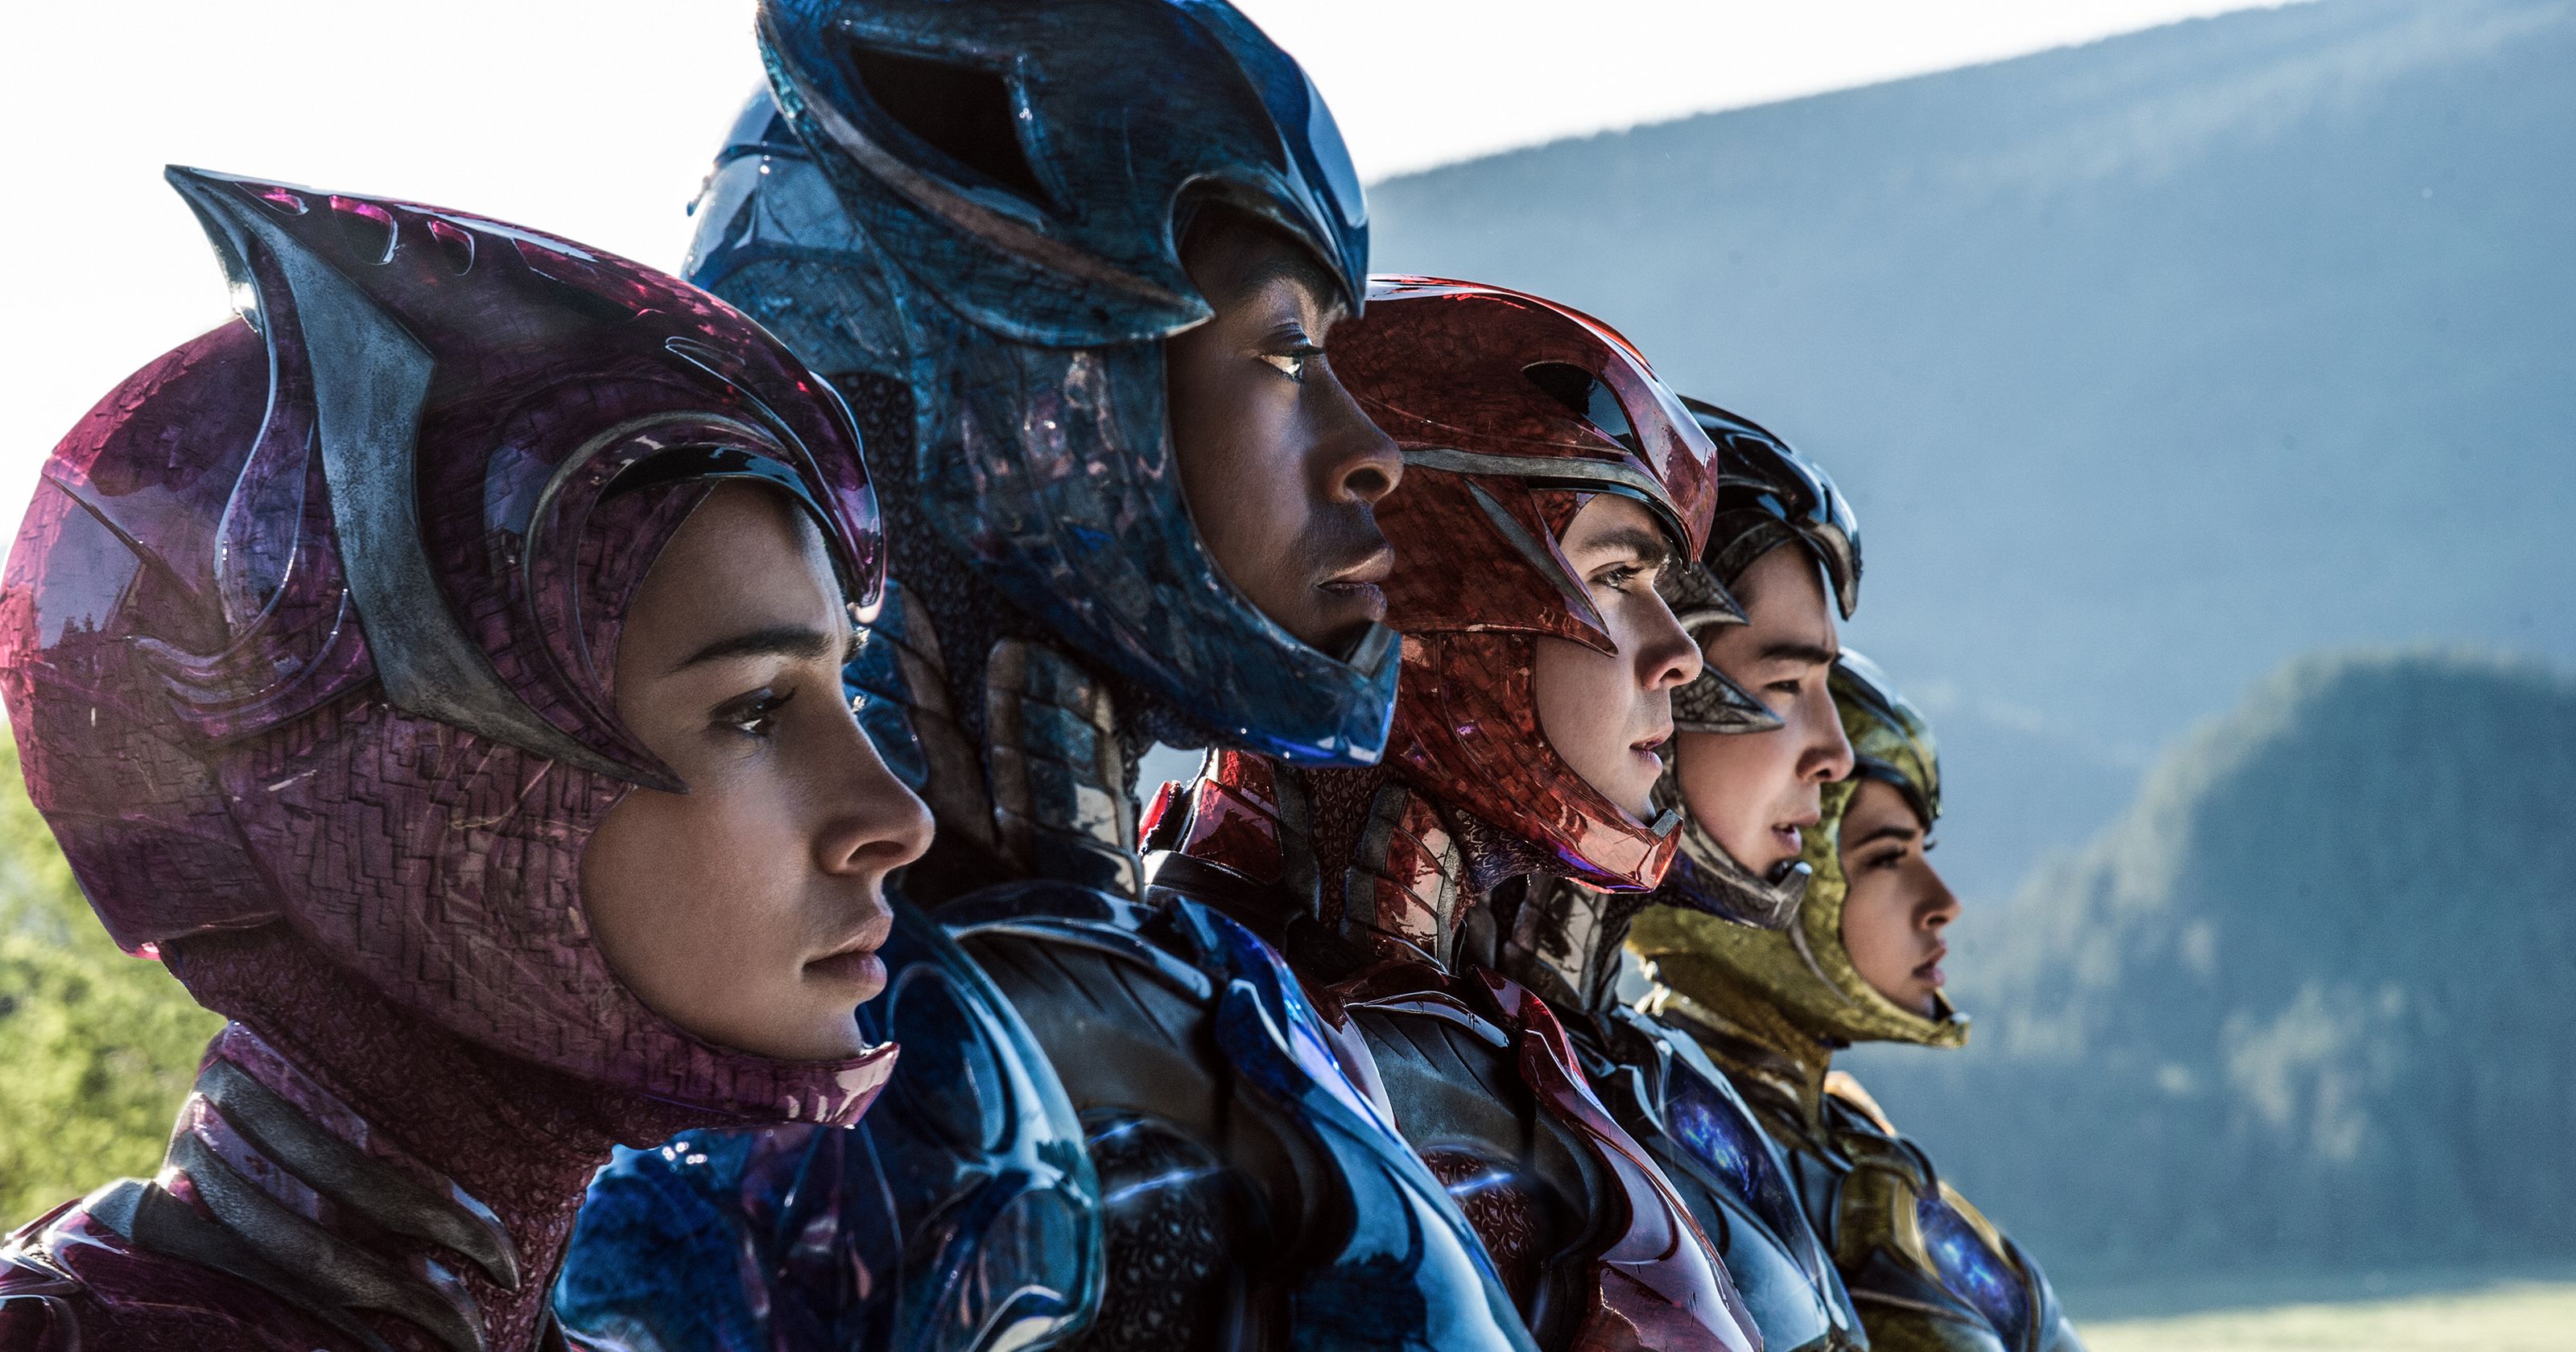 youthful power rangers invades the packed superhero movie space